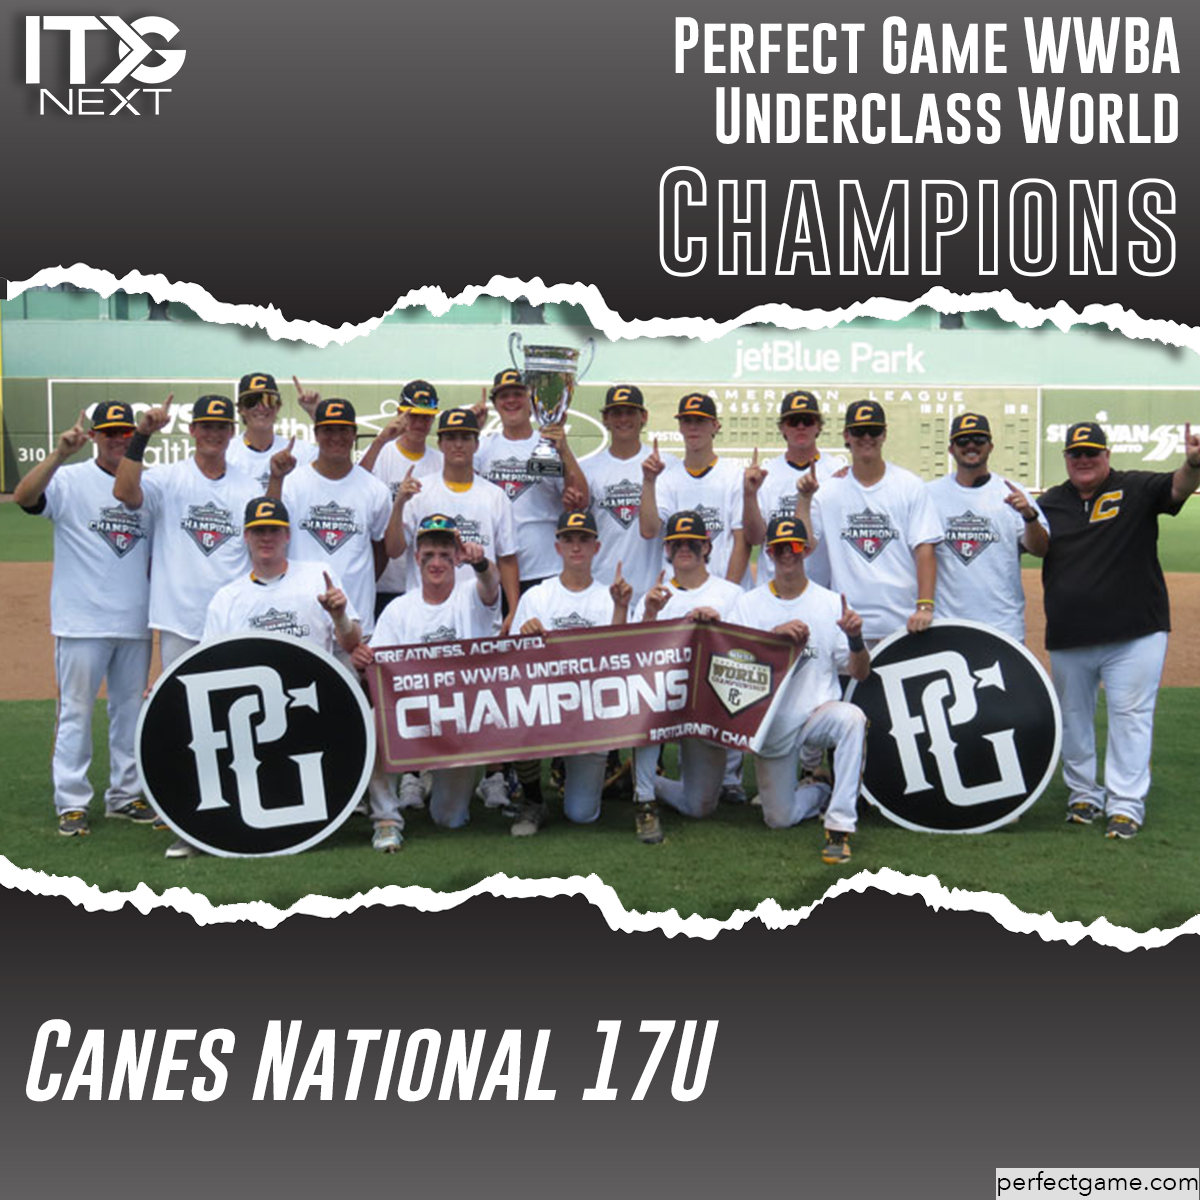 Canes National - PG World Championships, Day 3 